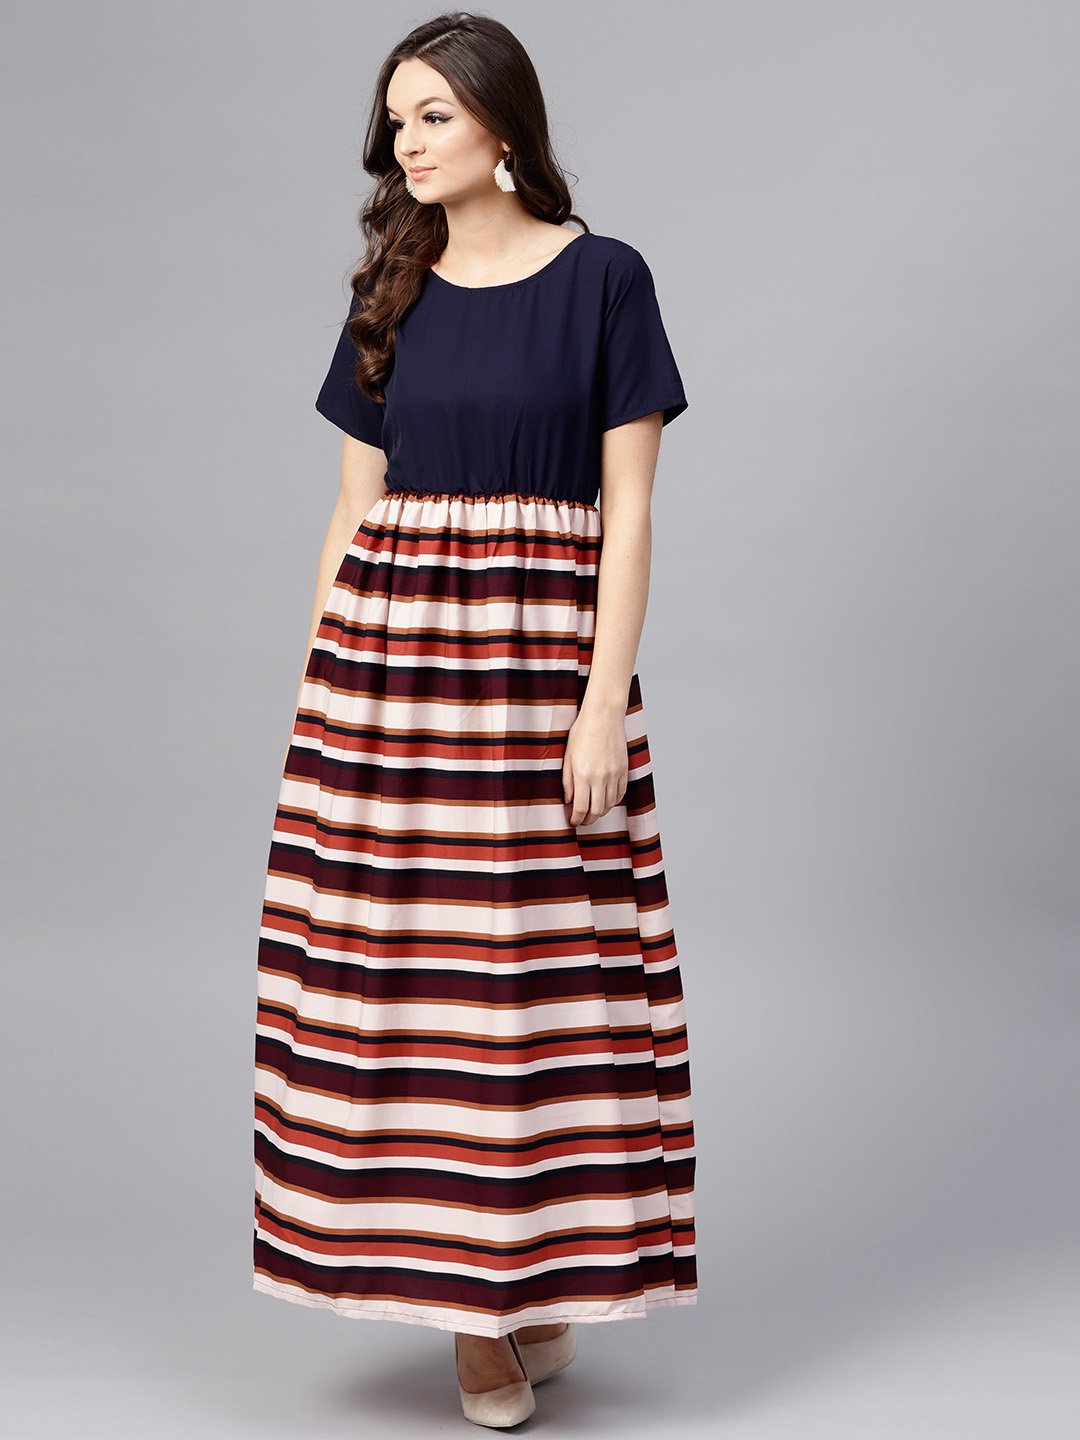 Women's Multi Colored Maxi Dress With Round Neck And Half Sleeves - Nayo Clothing